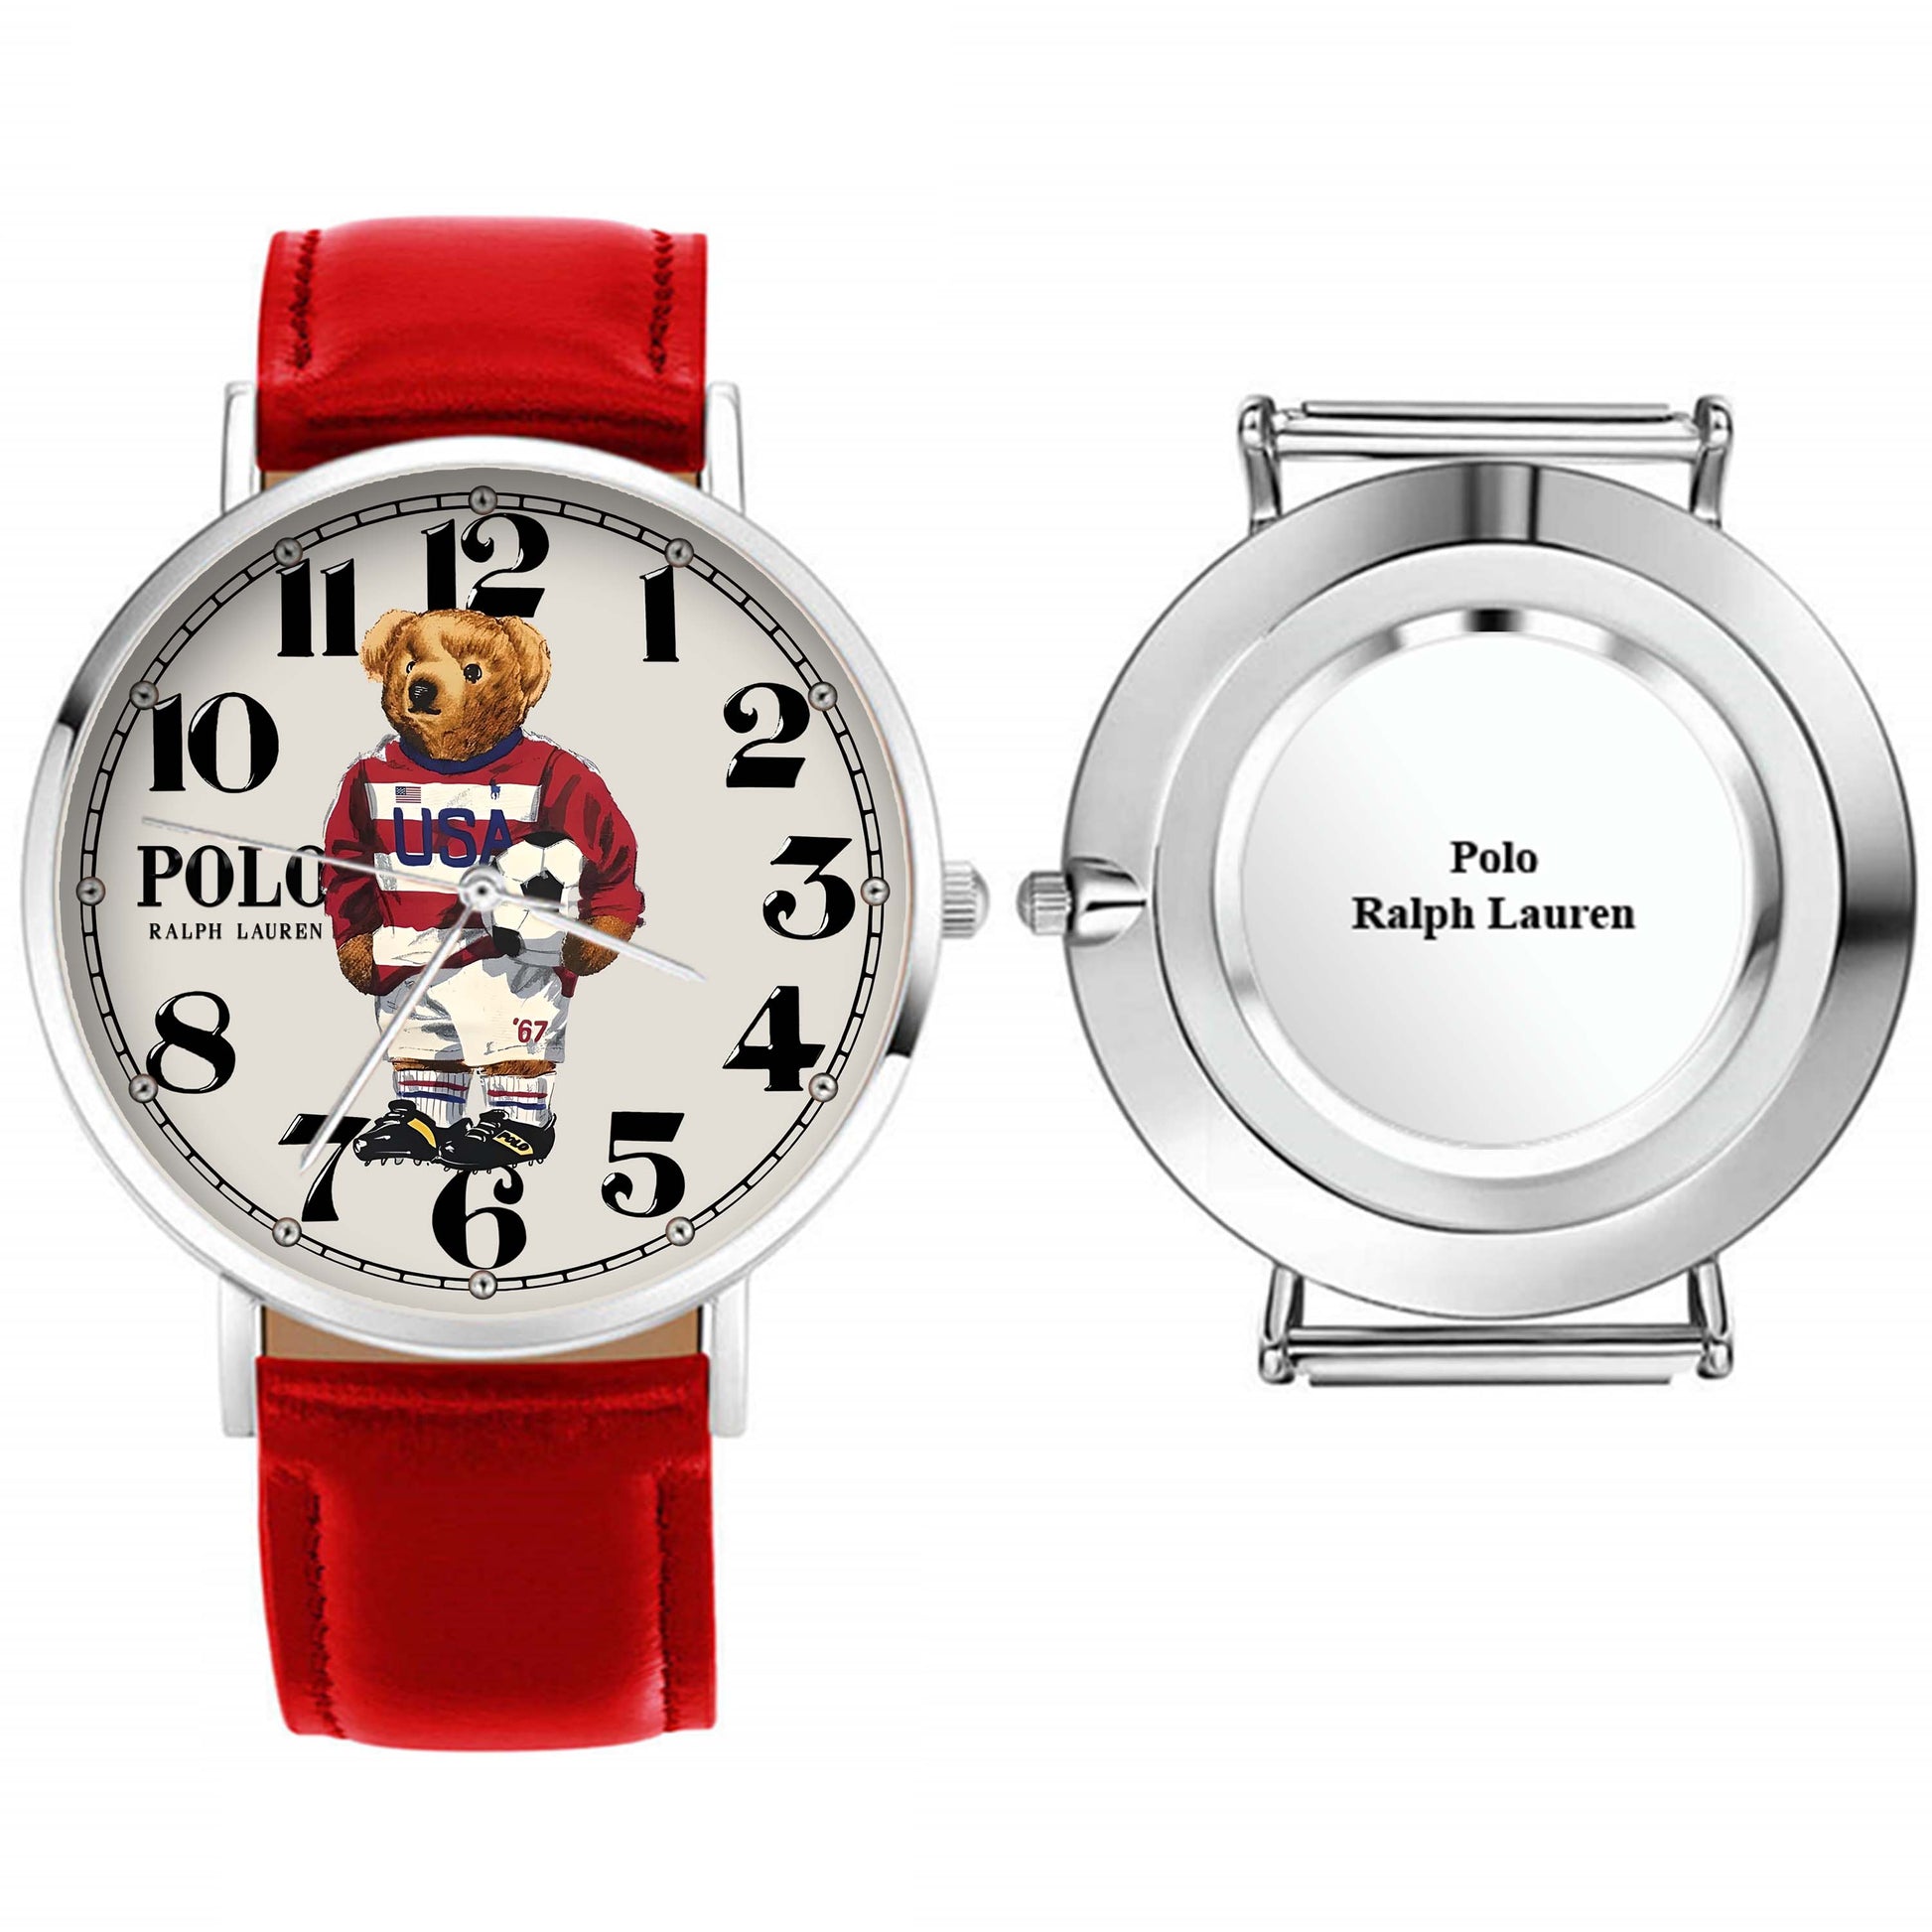 Polo Mls Soccer Bear Watches Nm29.16